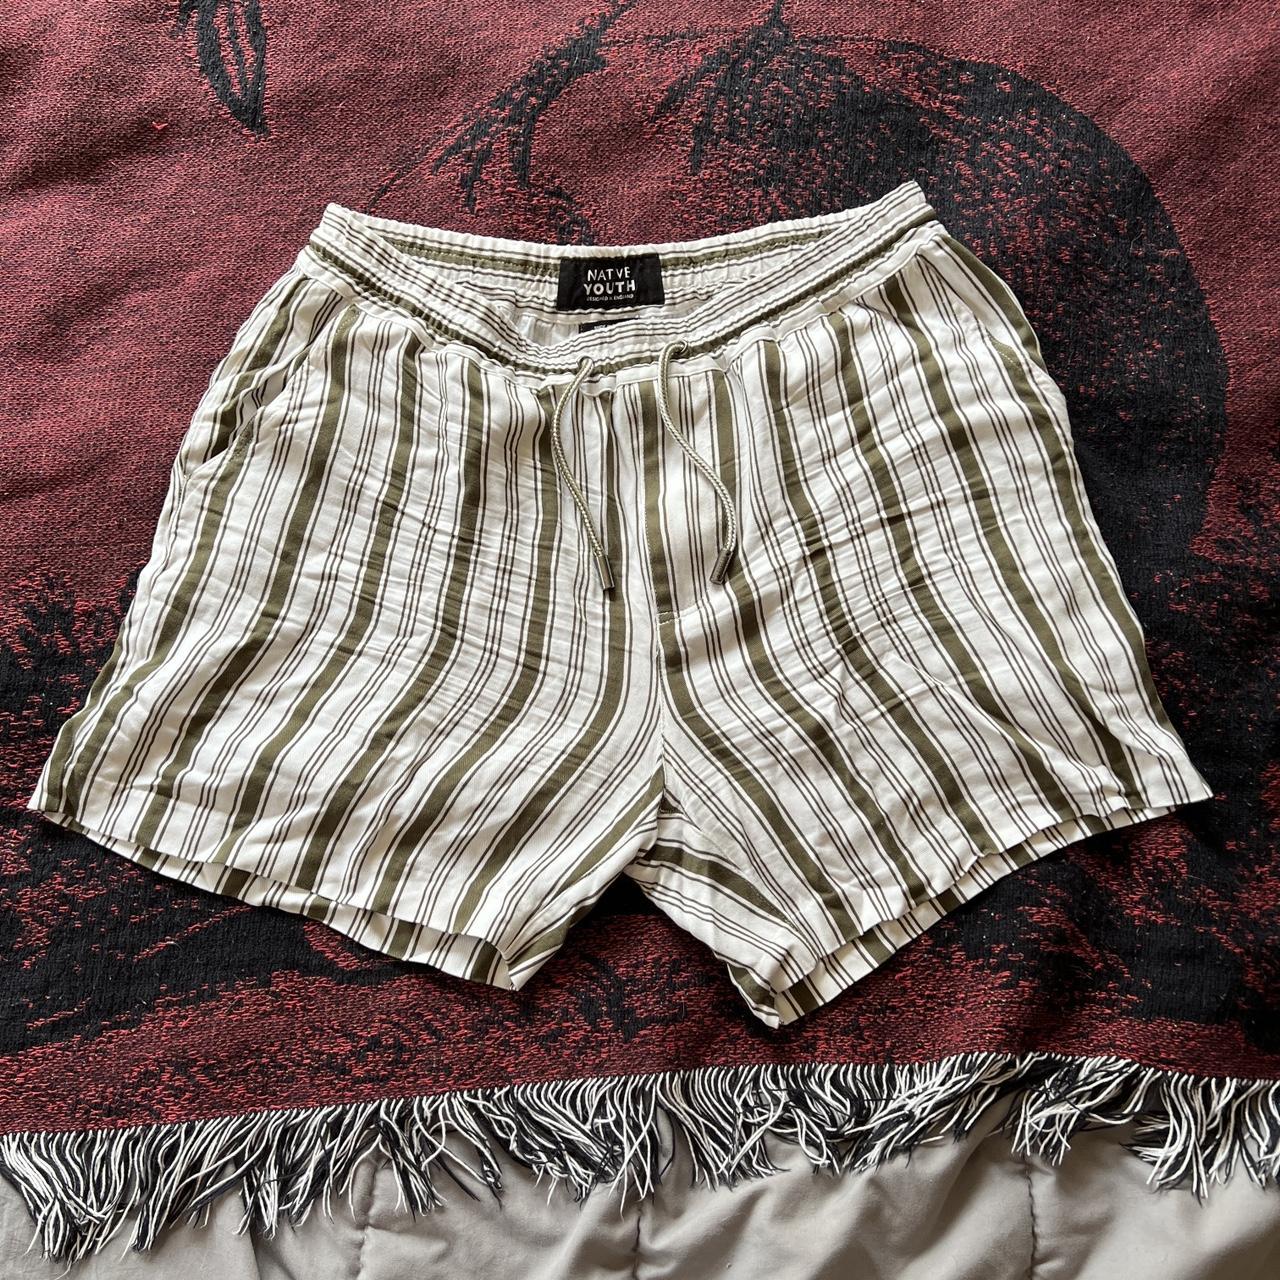 Native Youth Men's Green and White Shorts